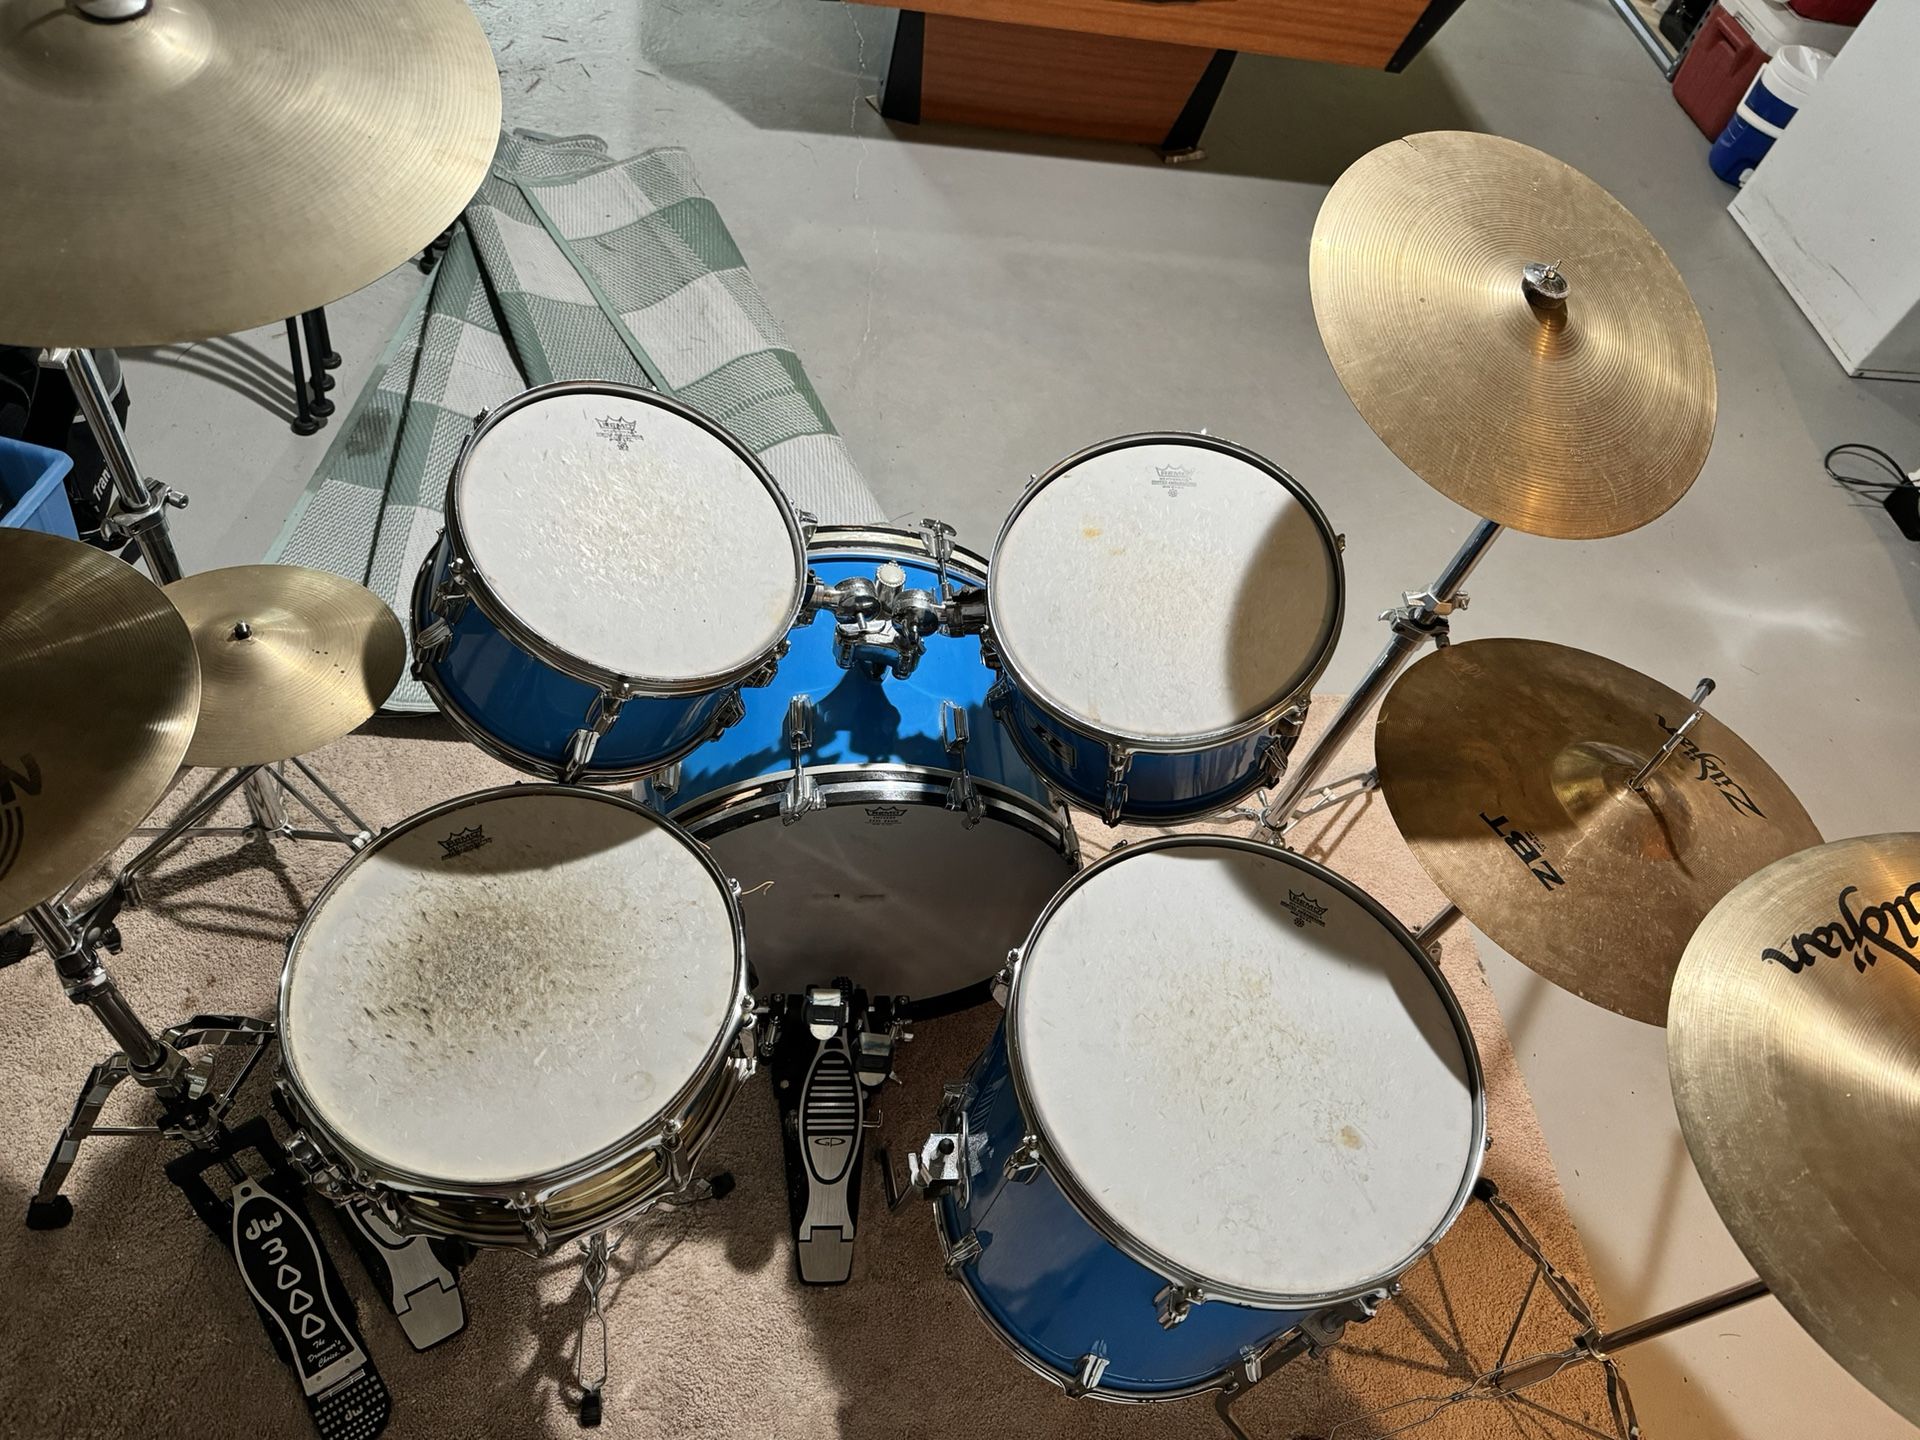 Mid 70’s Roger’s Drum Kit With Many Accessories, Willing To Negotiate 